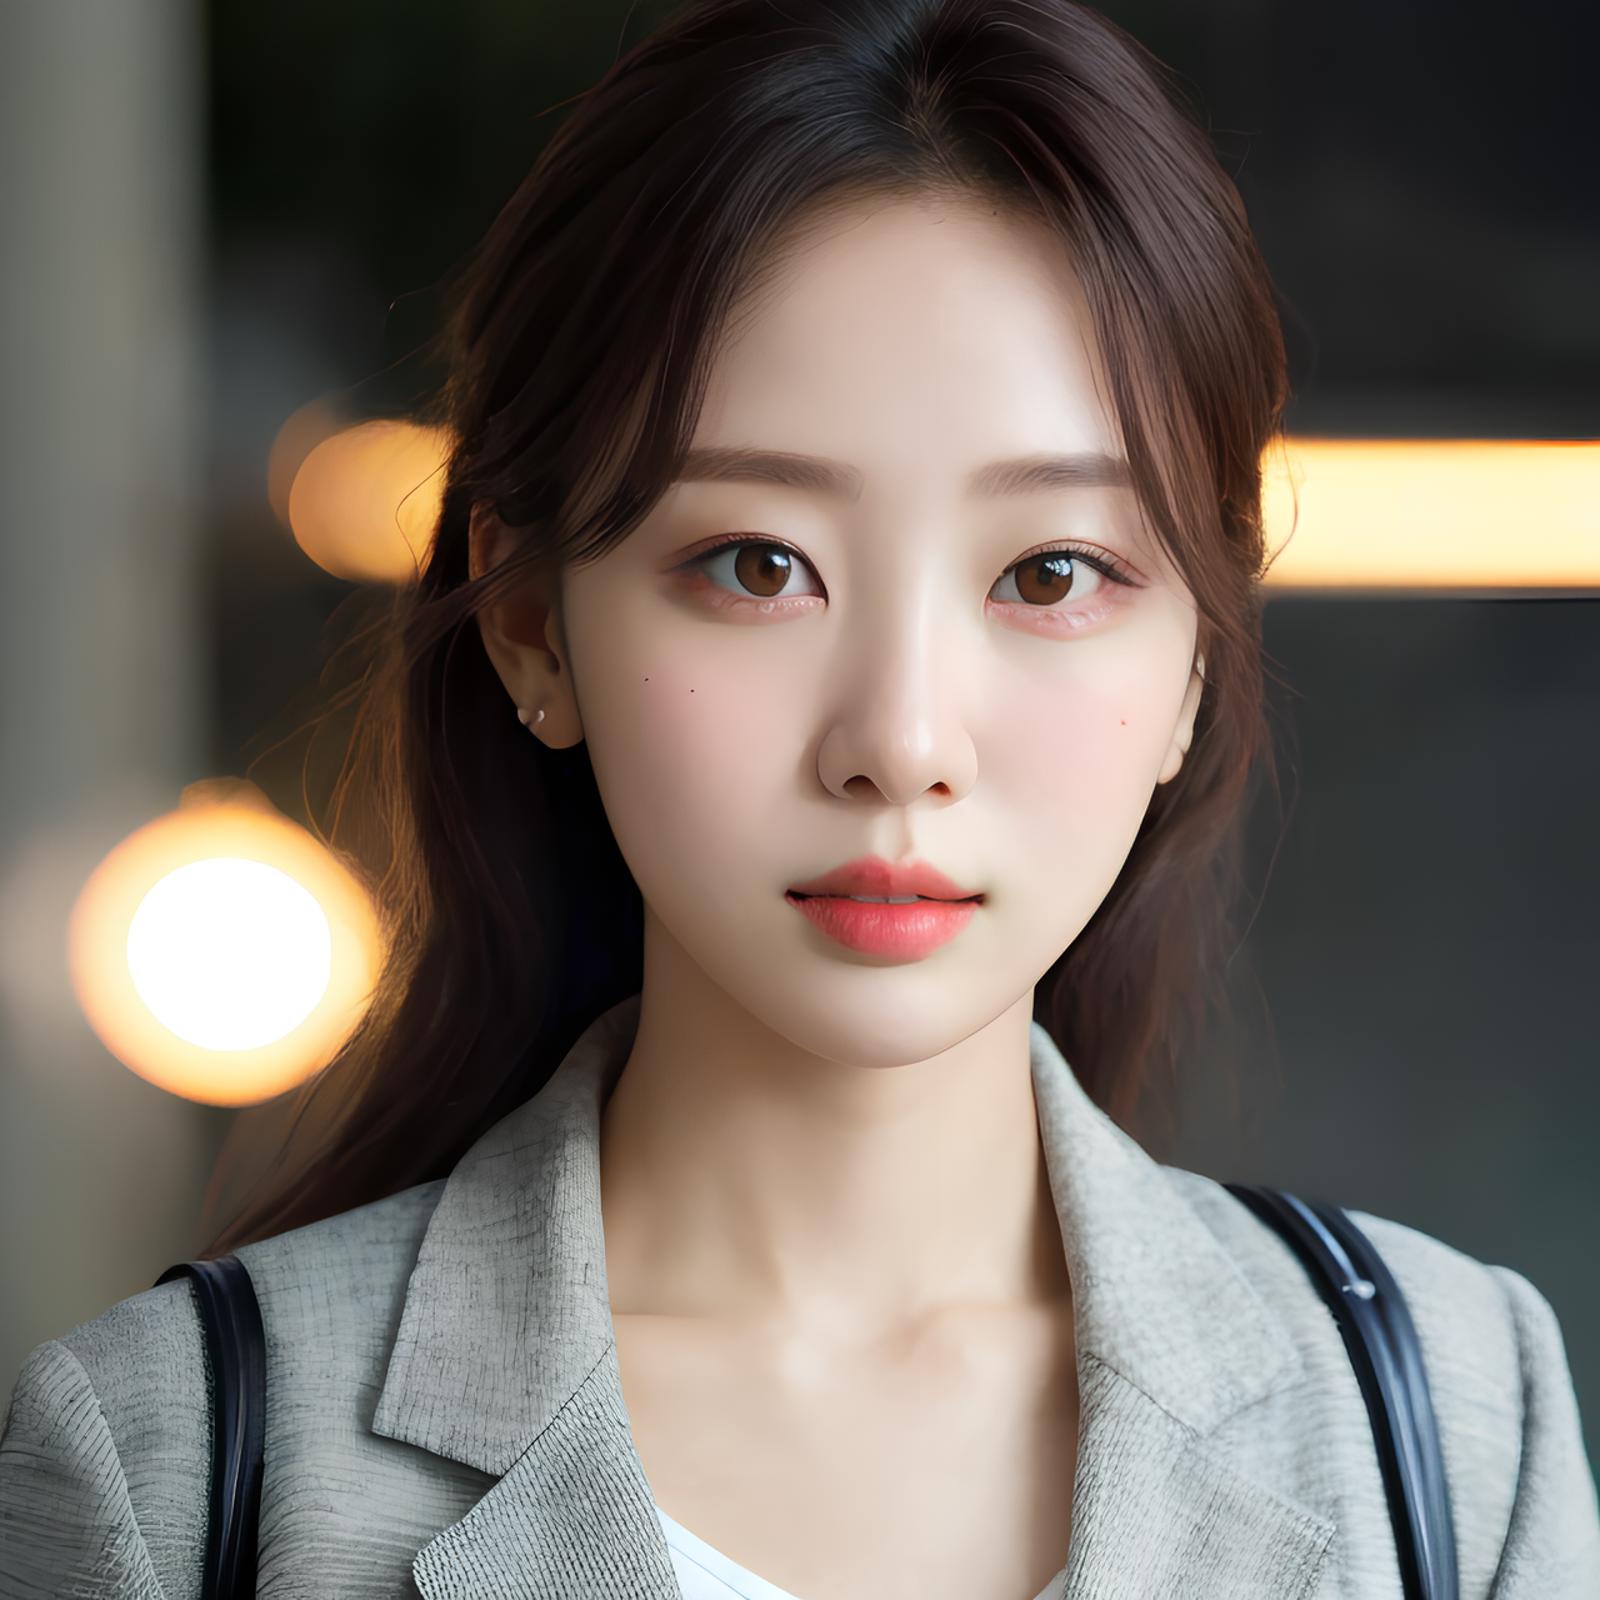 Not Loona - YVES image by Tissue_AI